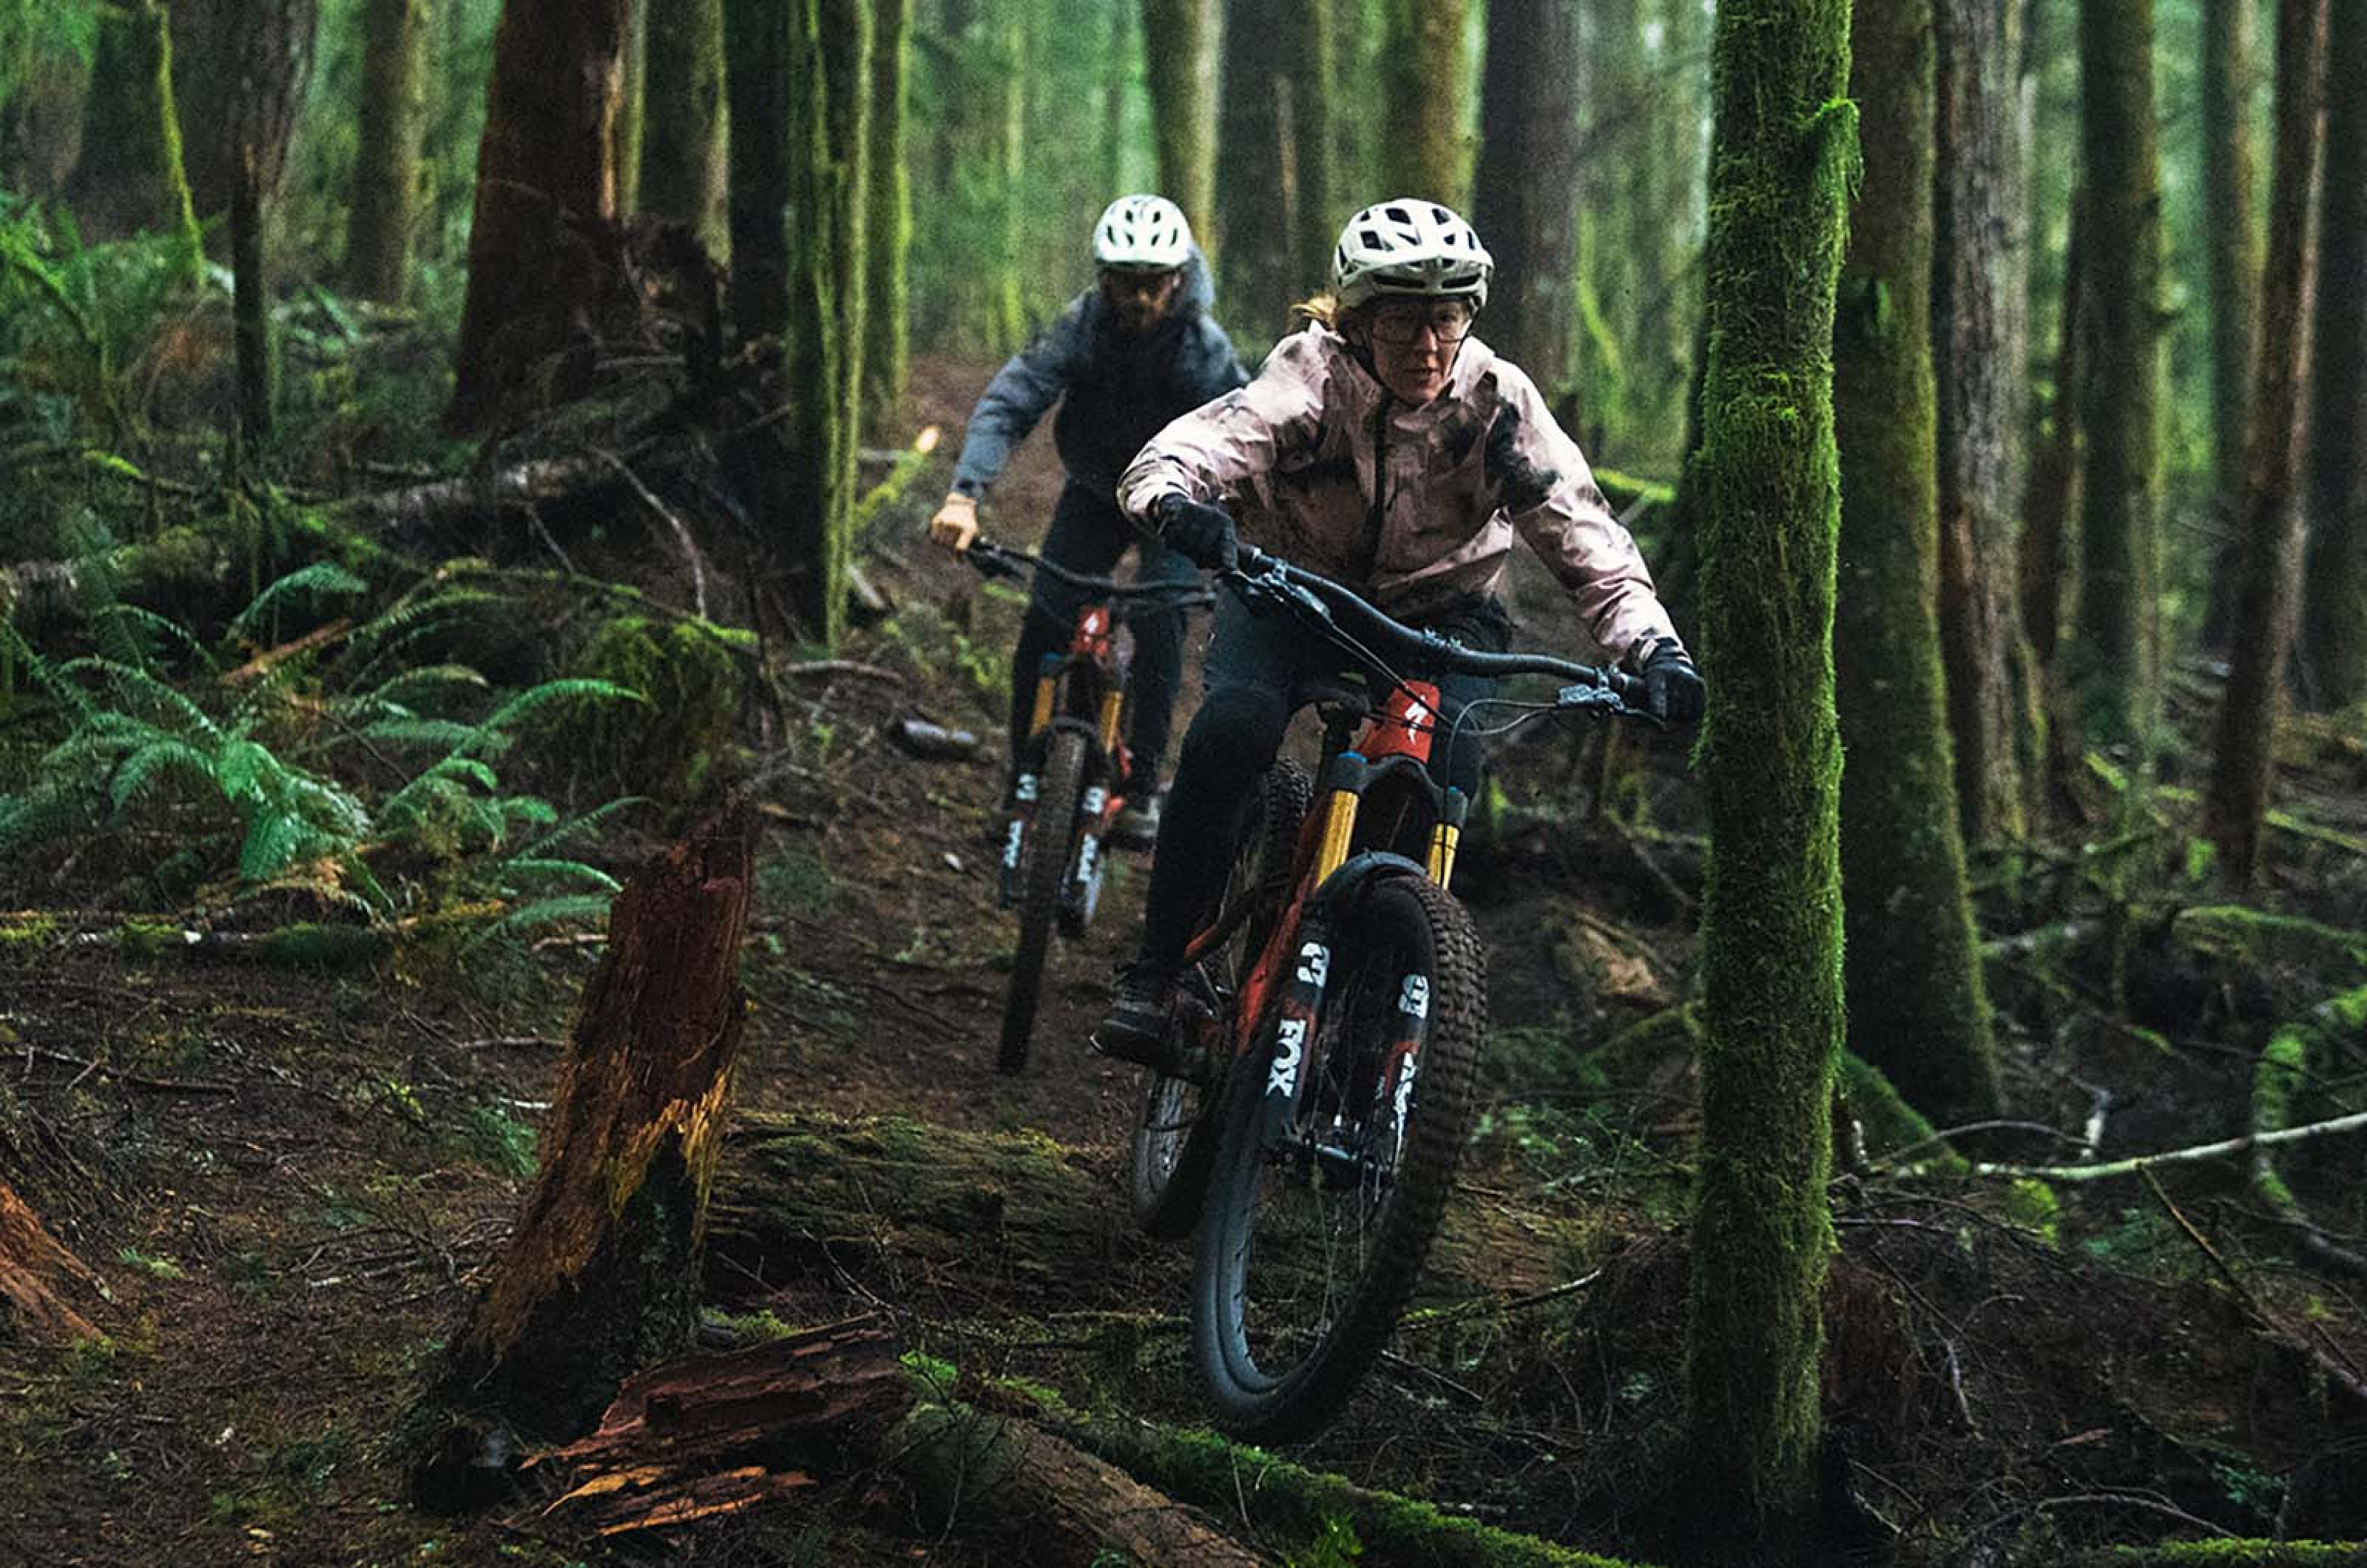 <p>Another capable off-roader, the Levo Comp Alloy is a slick eMTB that doesn't compromise on performance. Its short chainstays and clever geometry setup make it feel like a non-electric machine for plenty of thrills on trials.</p>  <p>The Turbo Levo range has a few different types of e-bike, but we like the middle-of-the-road Comp for its alloy frame and spec. It has great performance for inclines and you get up to five hours of riding time. </p>